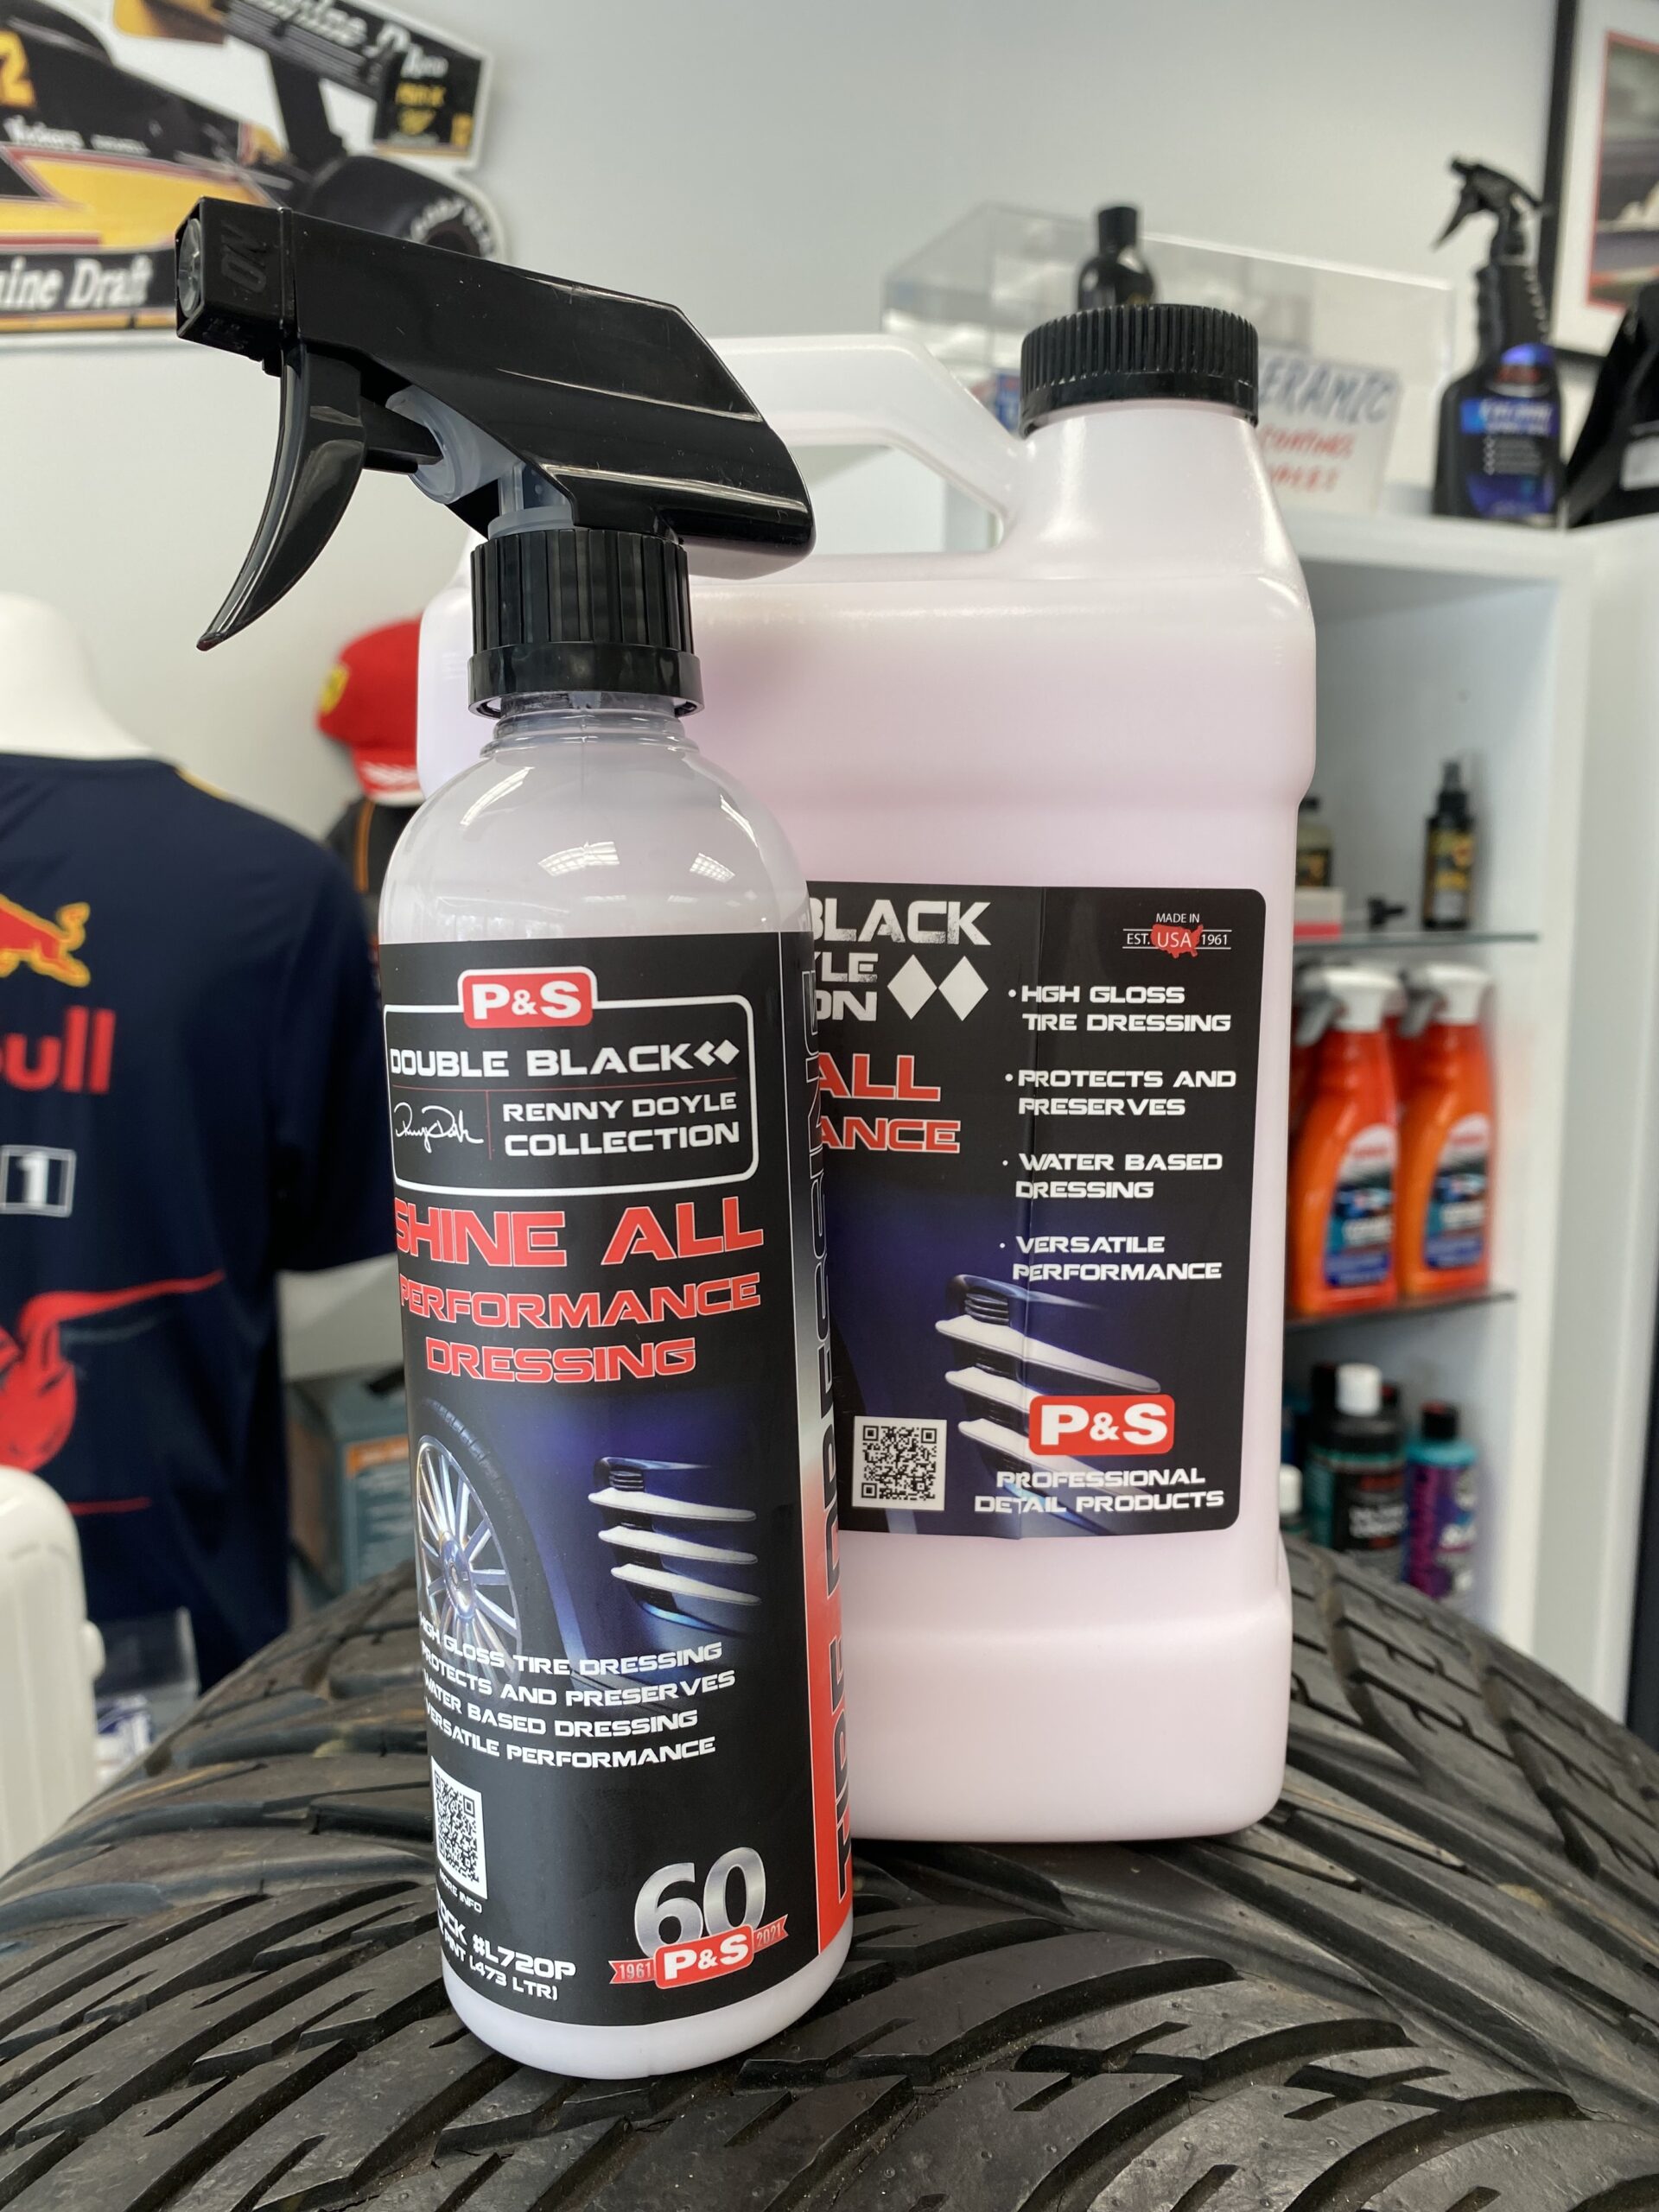 P&S Shine All High Performance Tire Dressing (GAL) - iRep Auto Detail Supply